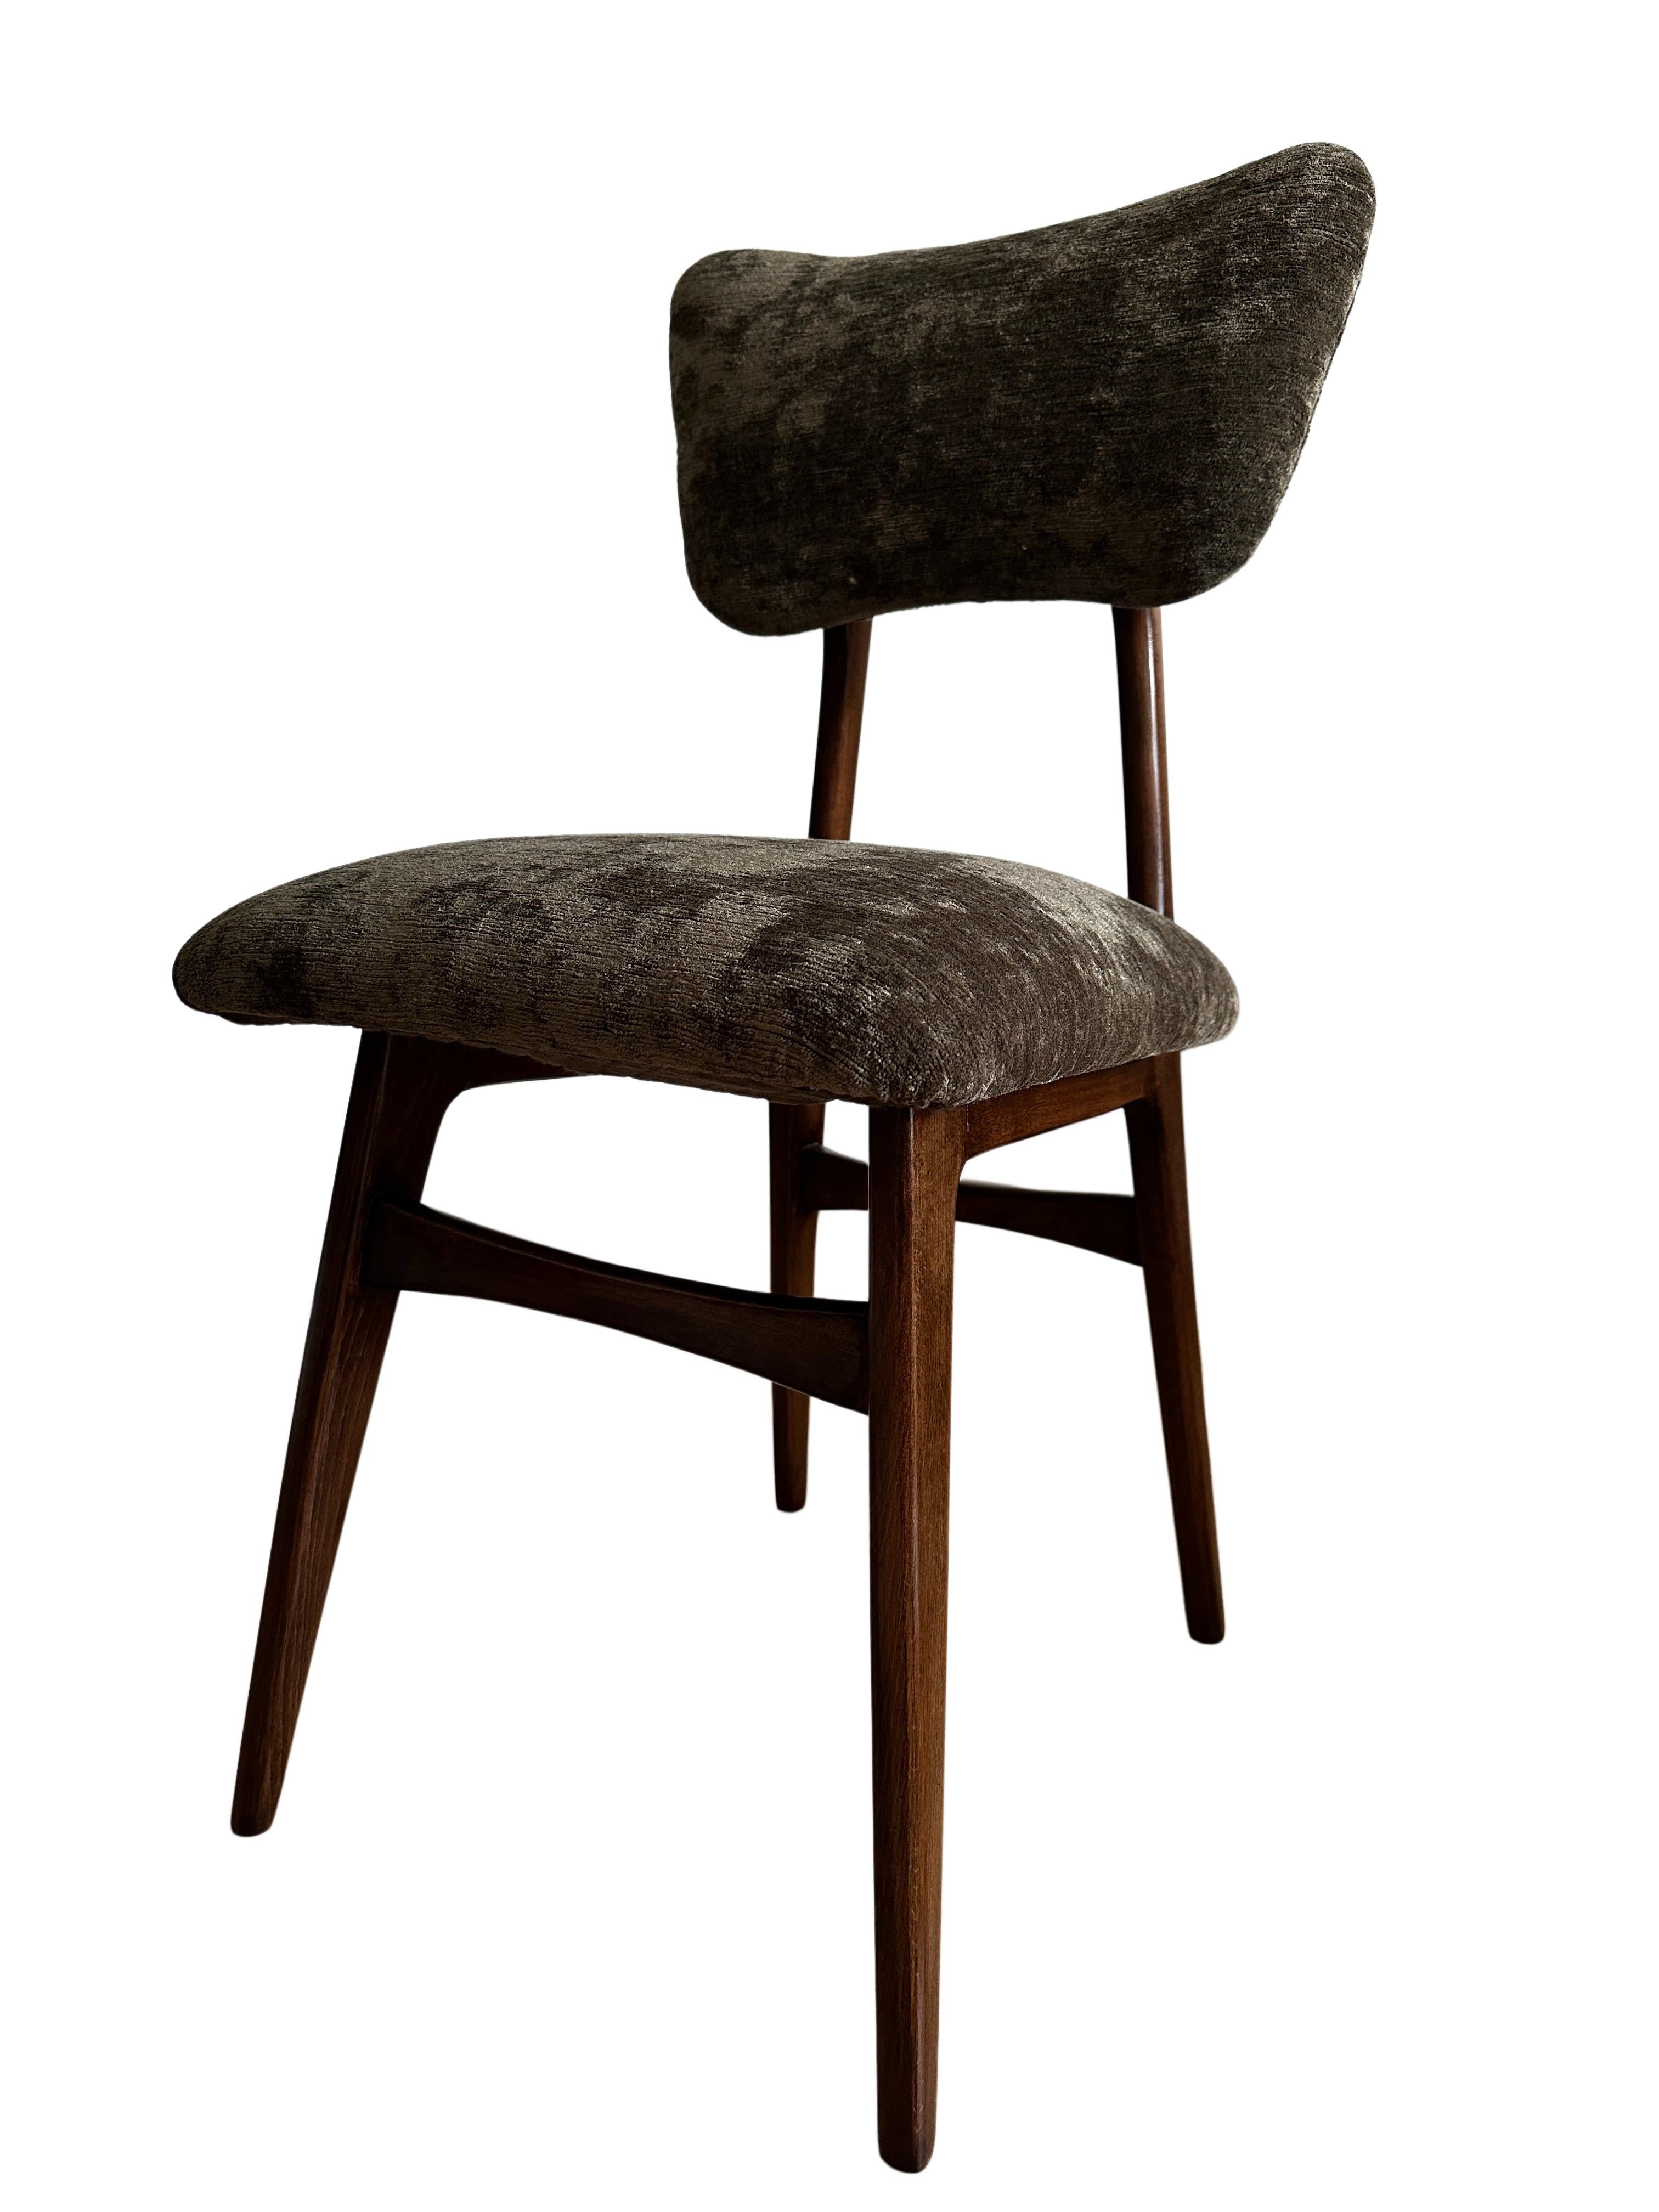 20th Century Set of Two Midcentury Dining Chairs in Green Velvet Upholstery, Poland, 1960s For Sale